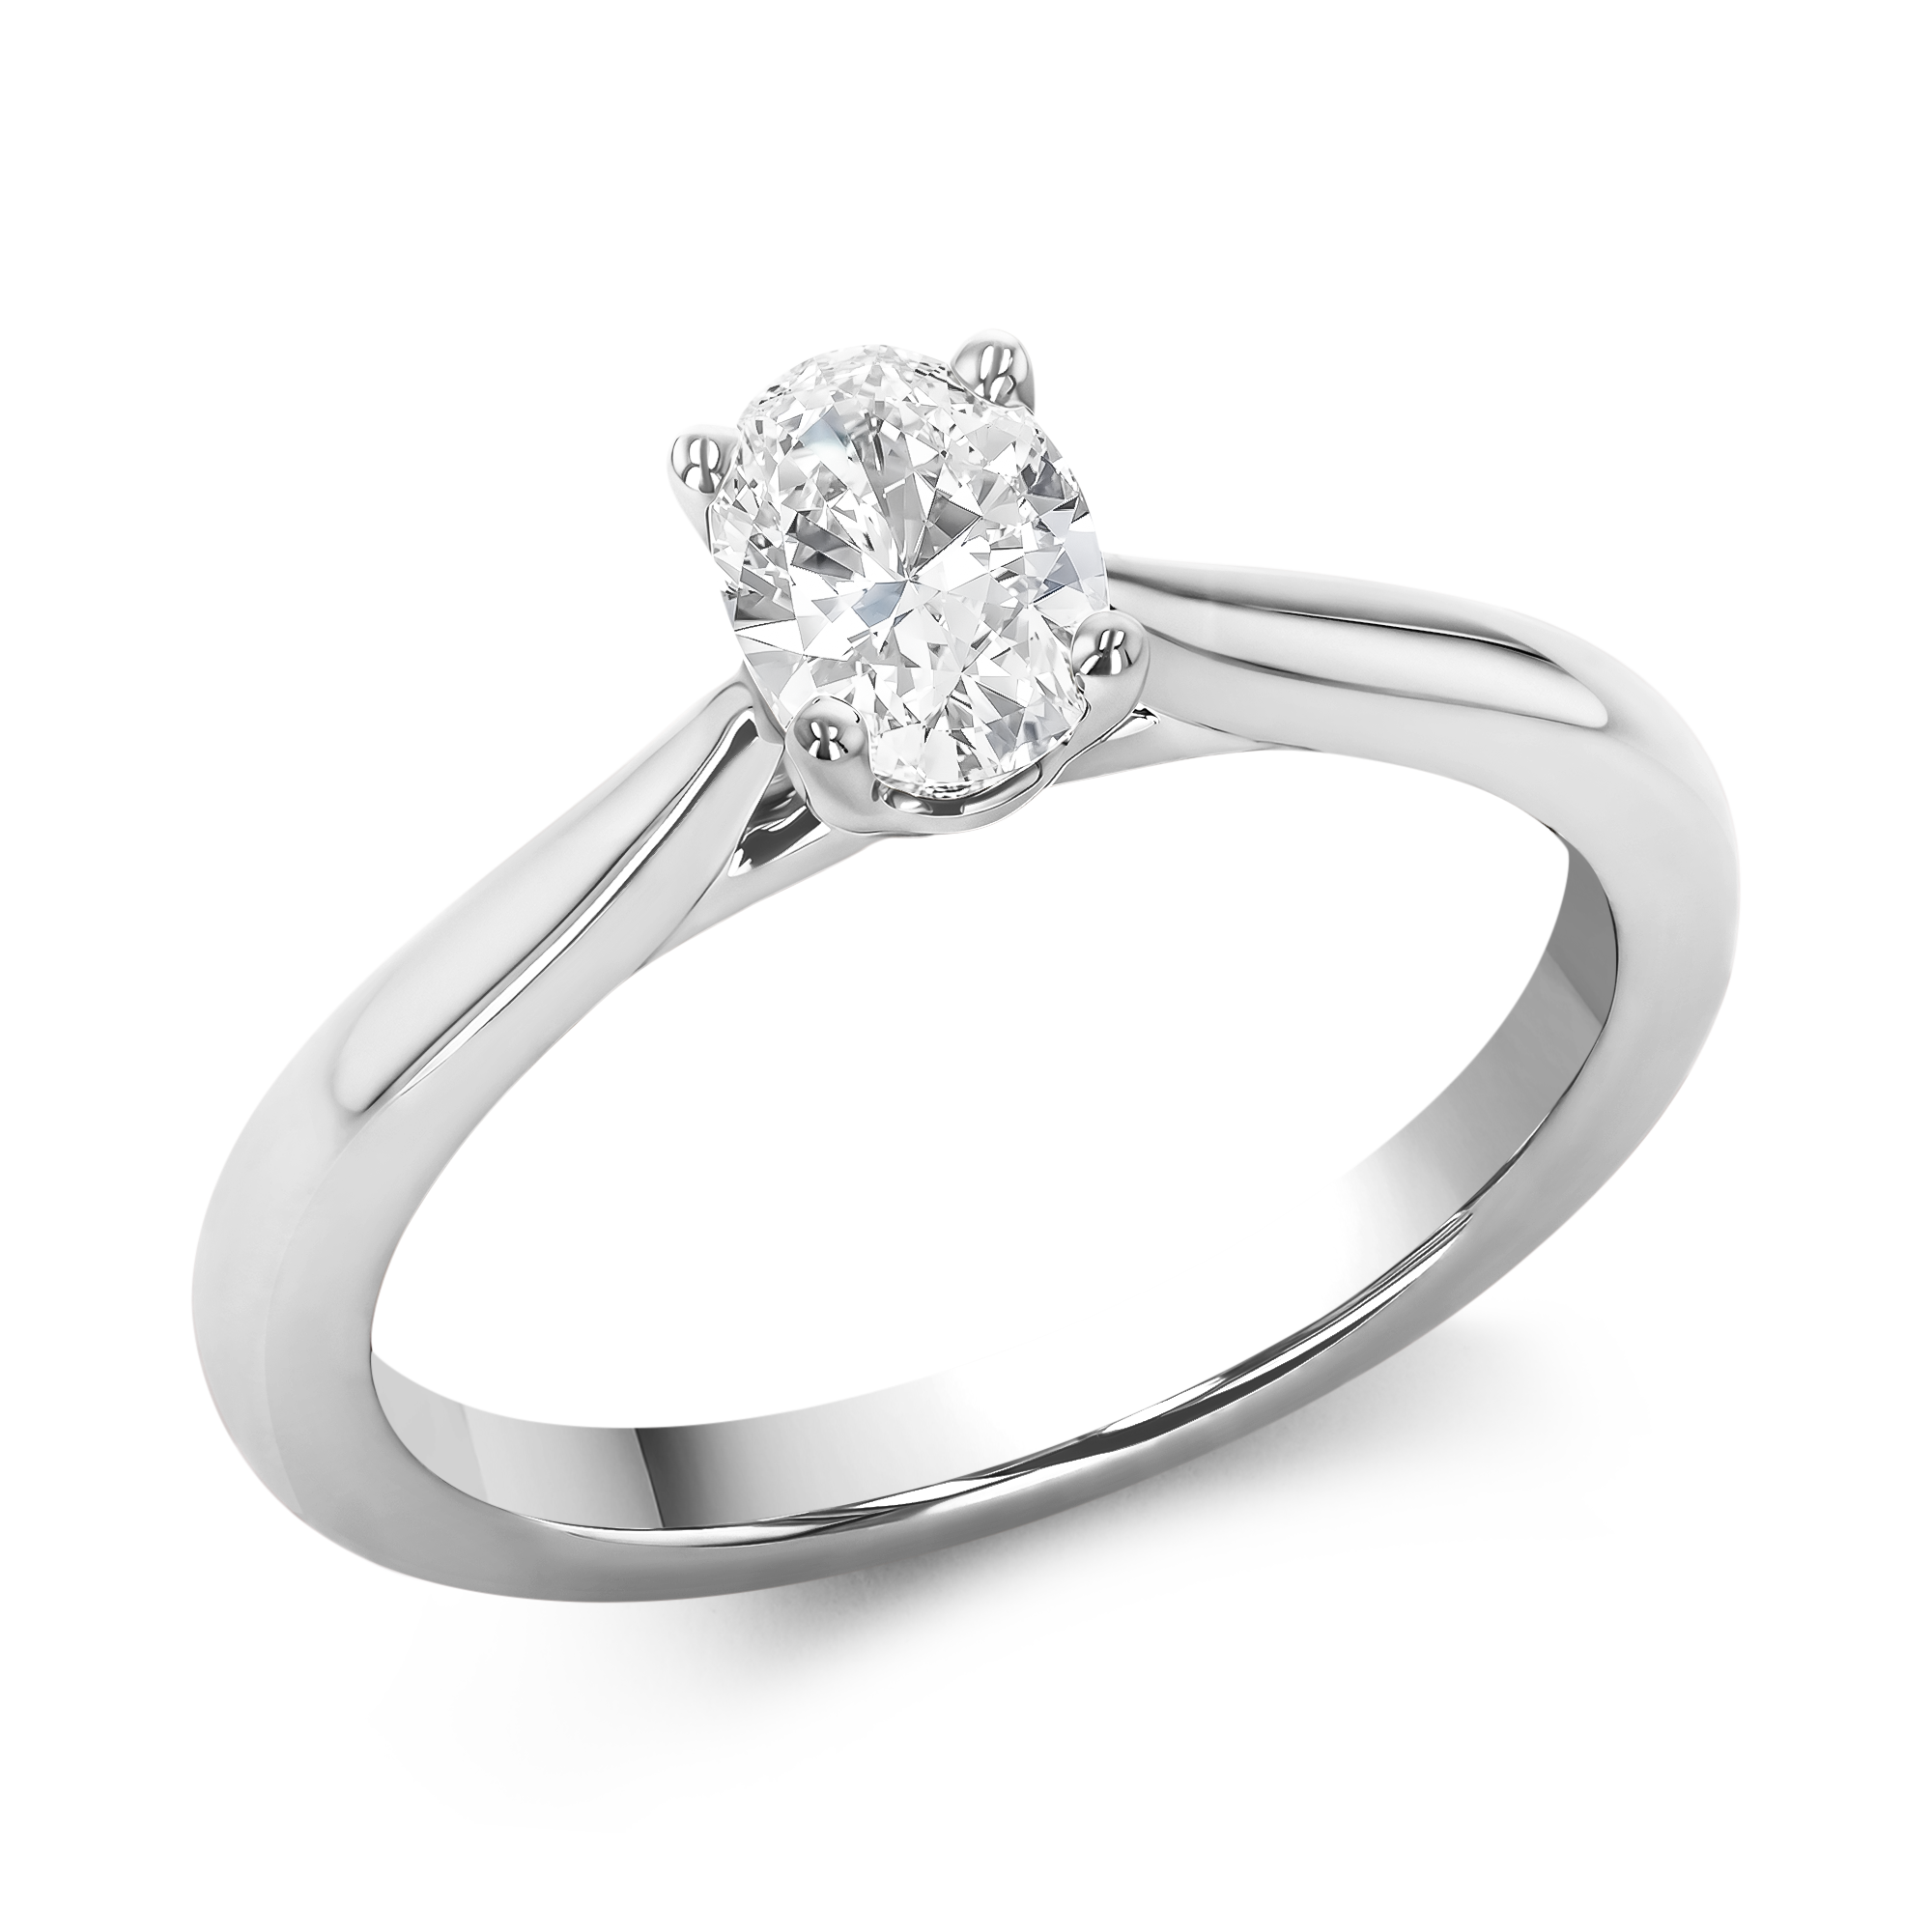 Gaia 0.51ct Diamond Solitaire Ring Oval Cut, Claw Set_1